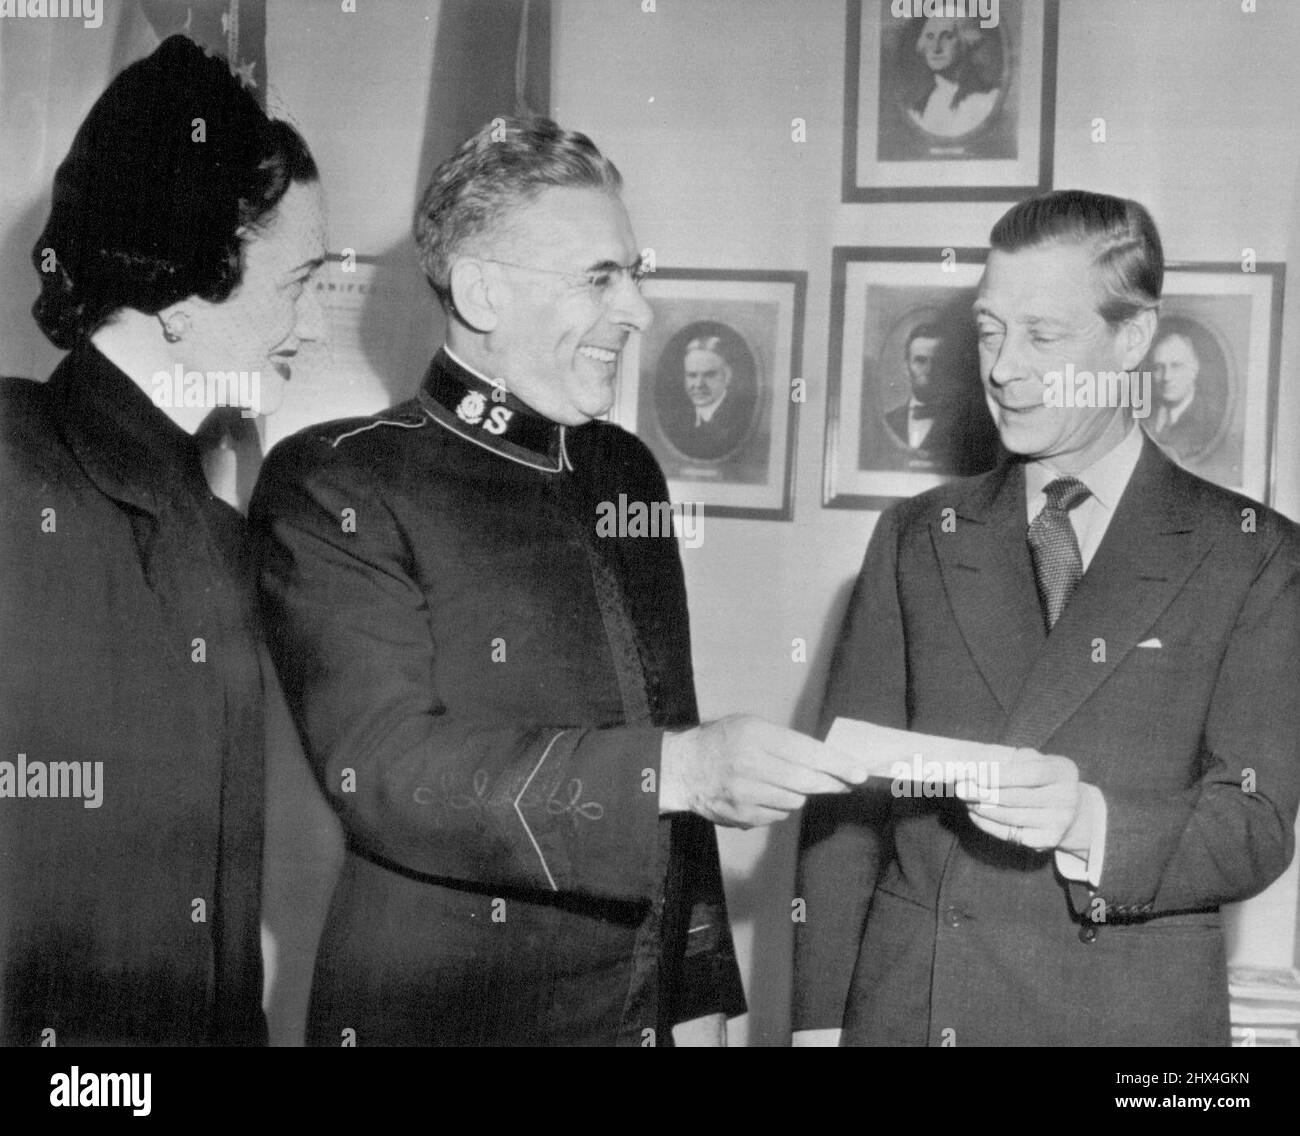 Duke of Windsor makes contribution -- The Duke of Windsor (right) presents a check to Commissioner Ernest I. Pugmire, National Commander of the Salvation Army, as the Duchess of Windsor (left) looks on here yesterday. The check marked the Duke and Duchess of Windsor's contribution to the Salvation Army's 1947 Annual Maintenance Appeal. December 10, 1946. (Photo by AP Wirephoto). Stock Photo